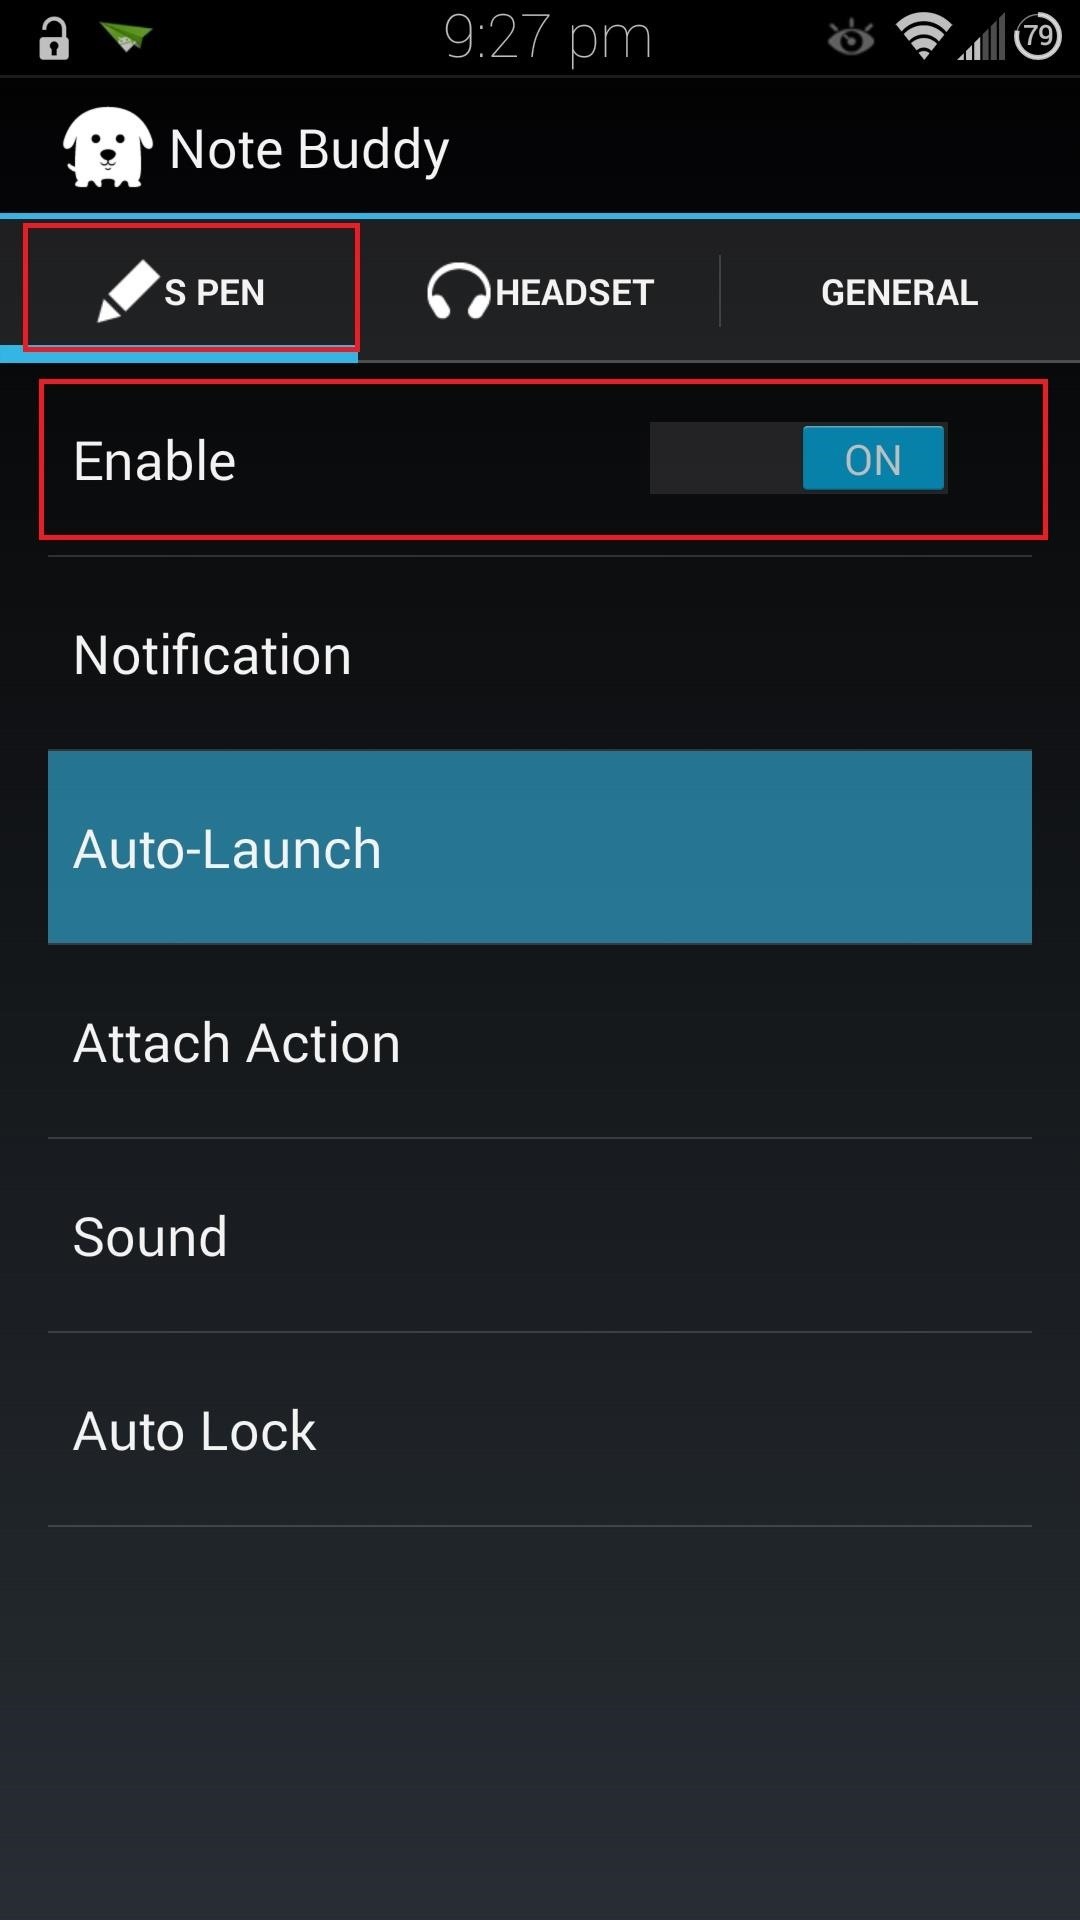 The Ultimate S Pen Customization Tool for Your Galaxy Note 3